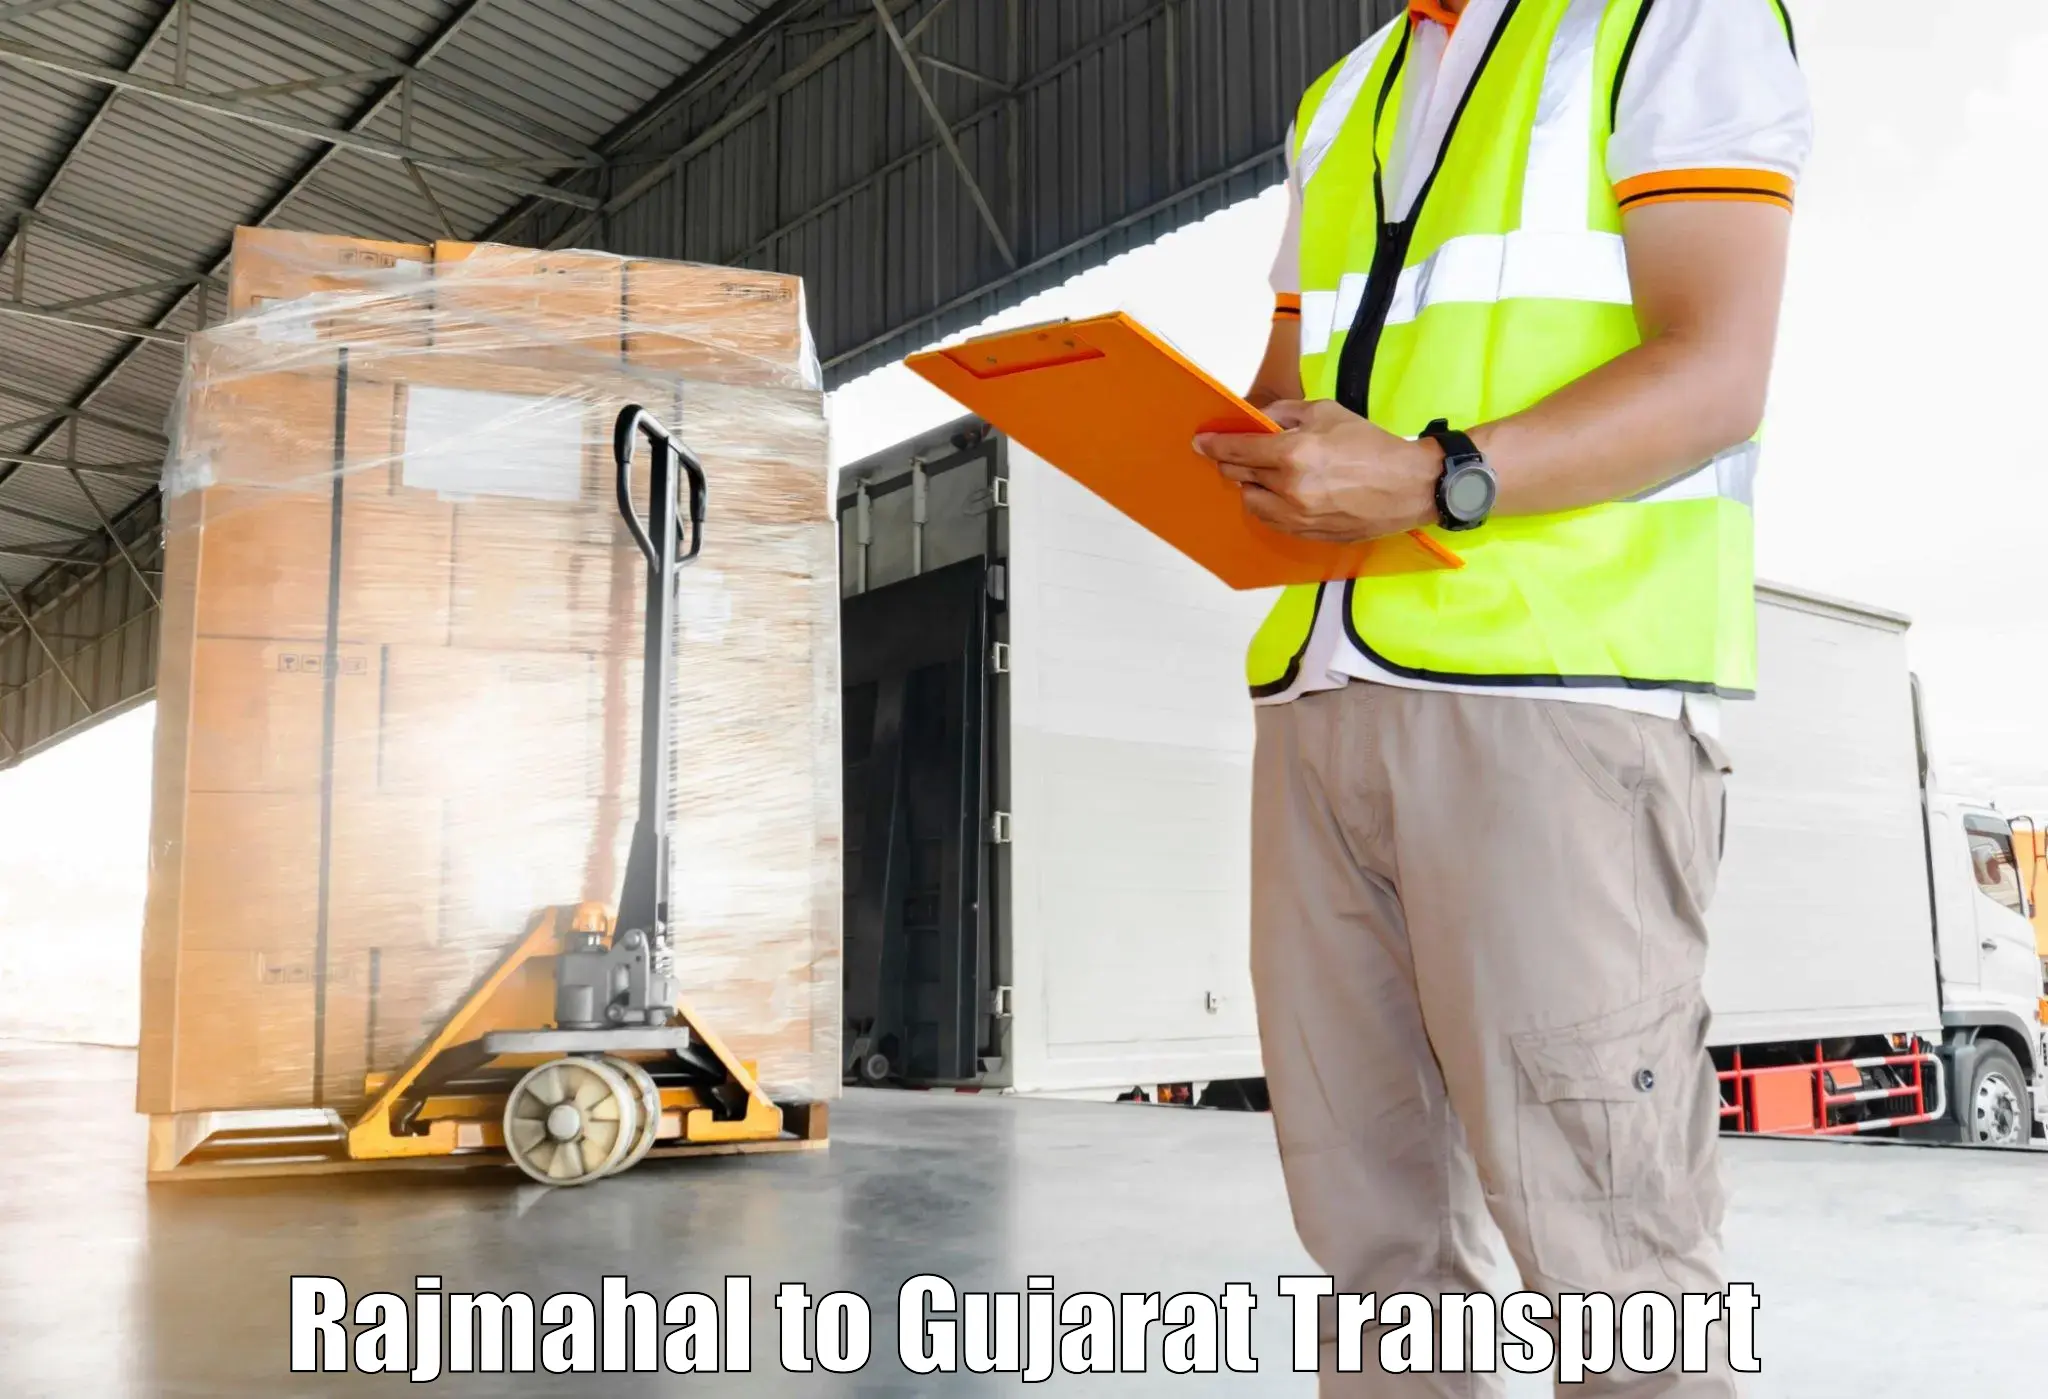 Vehicle transport services in Rajmahal to Bhuj